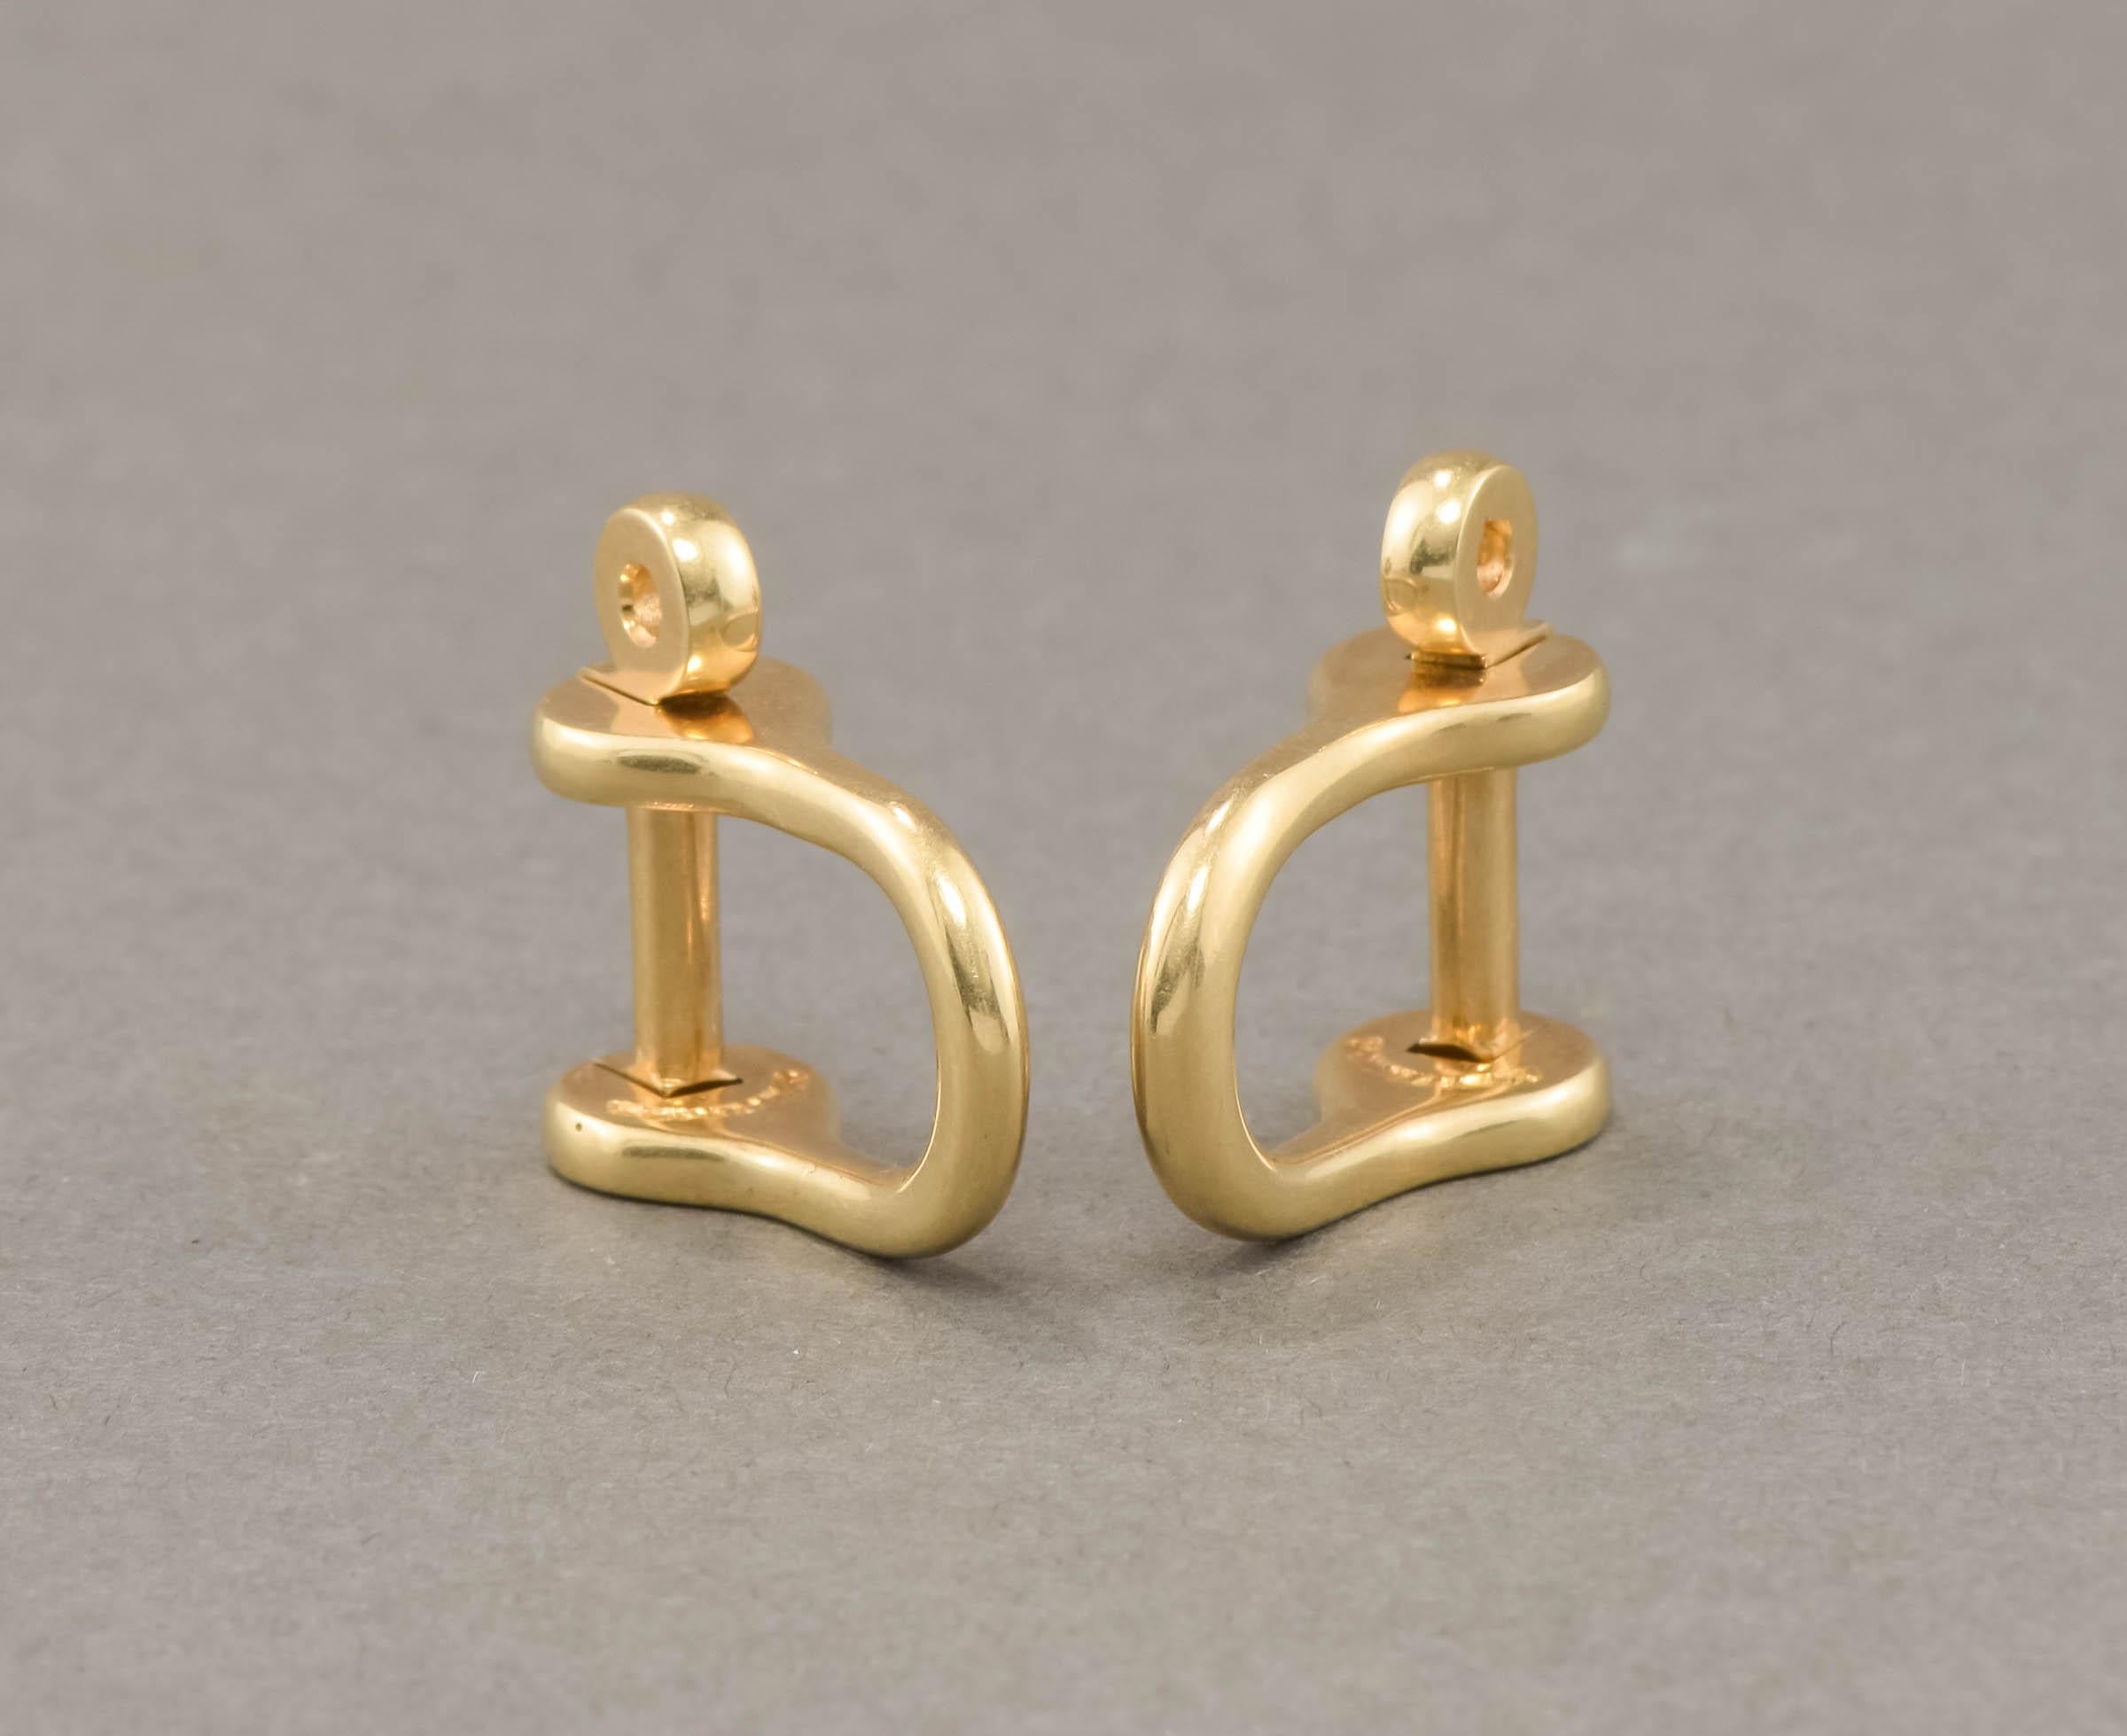 Offered is a wonderfully substantial and simply stylish pair of solid 14K gold cufflinks by Danish goldsmith, Ole Lyngguaard of Copenhagen.

Weighing a hefty 18.21 grams on my scale, these are elegant, hefty and high quality.  Both are marked for